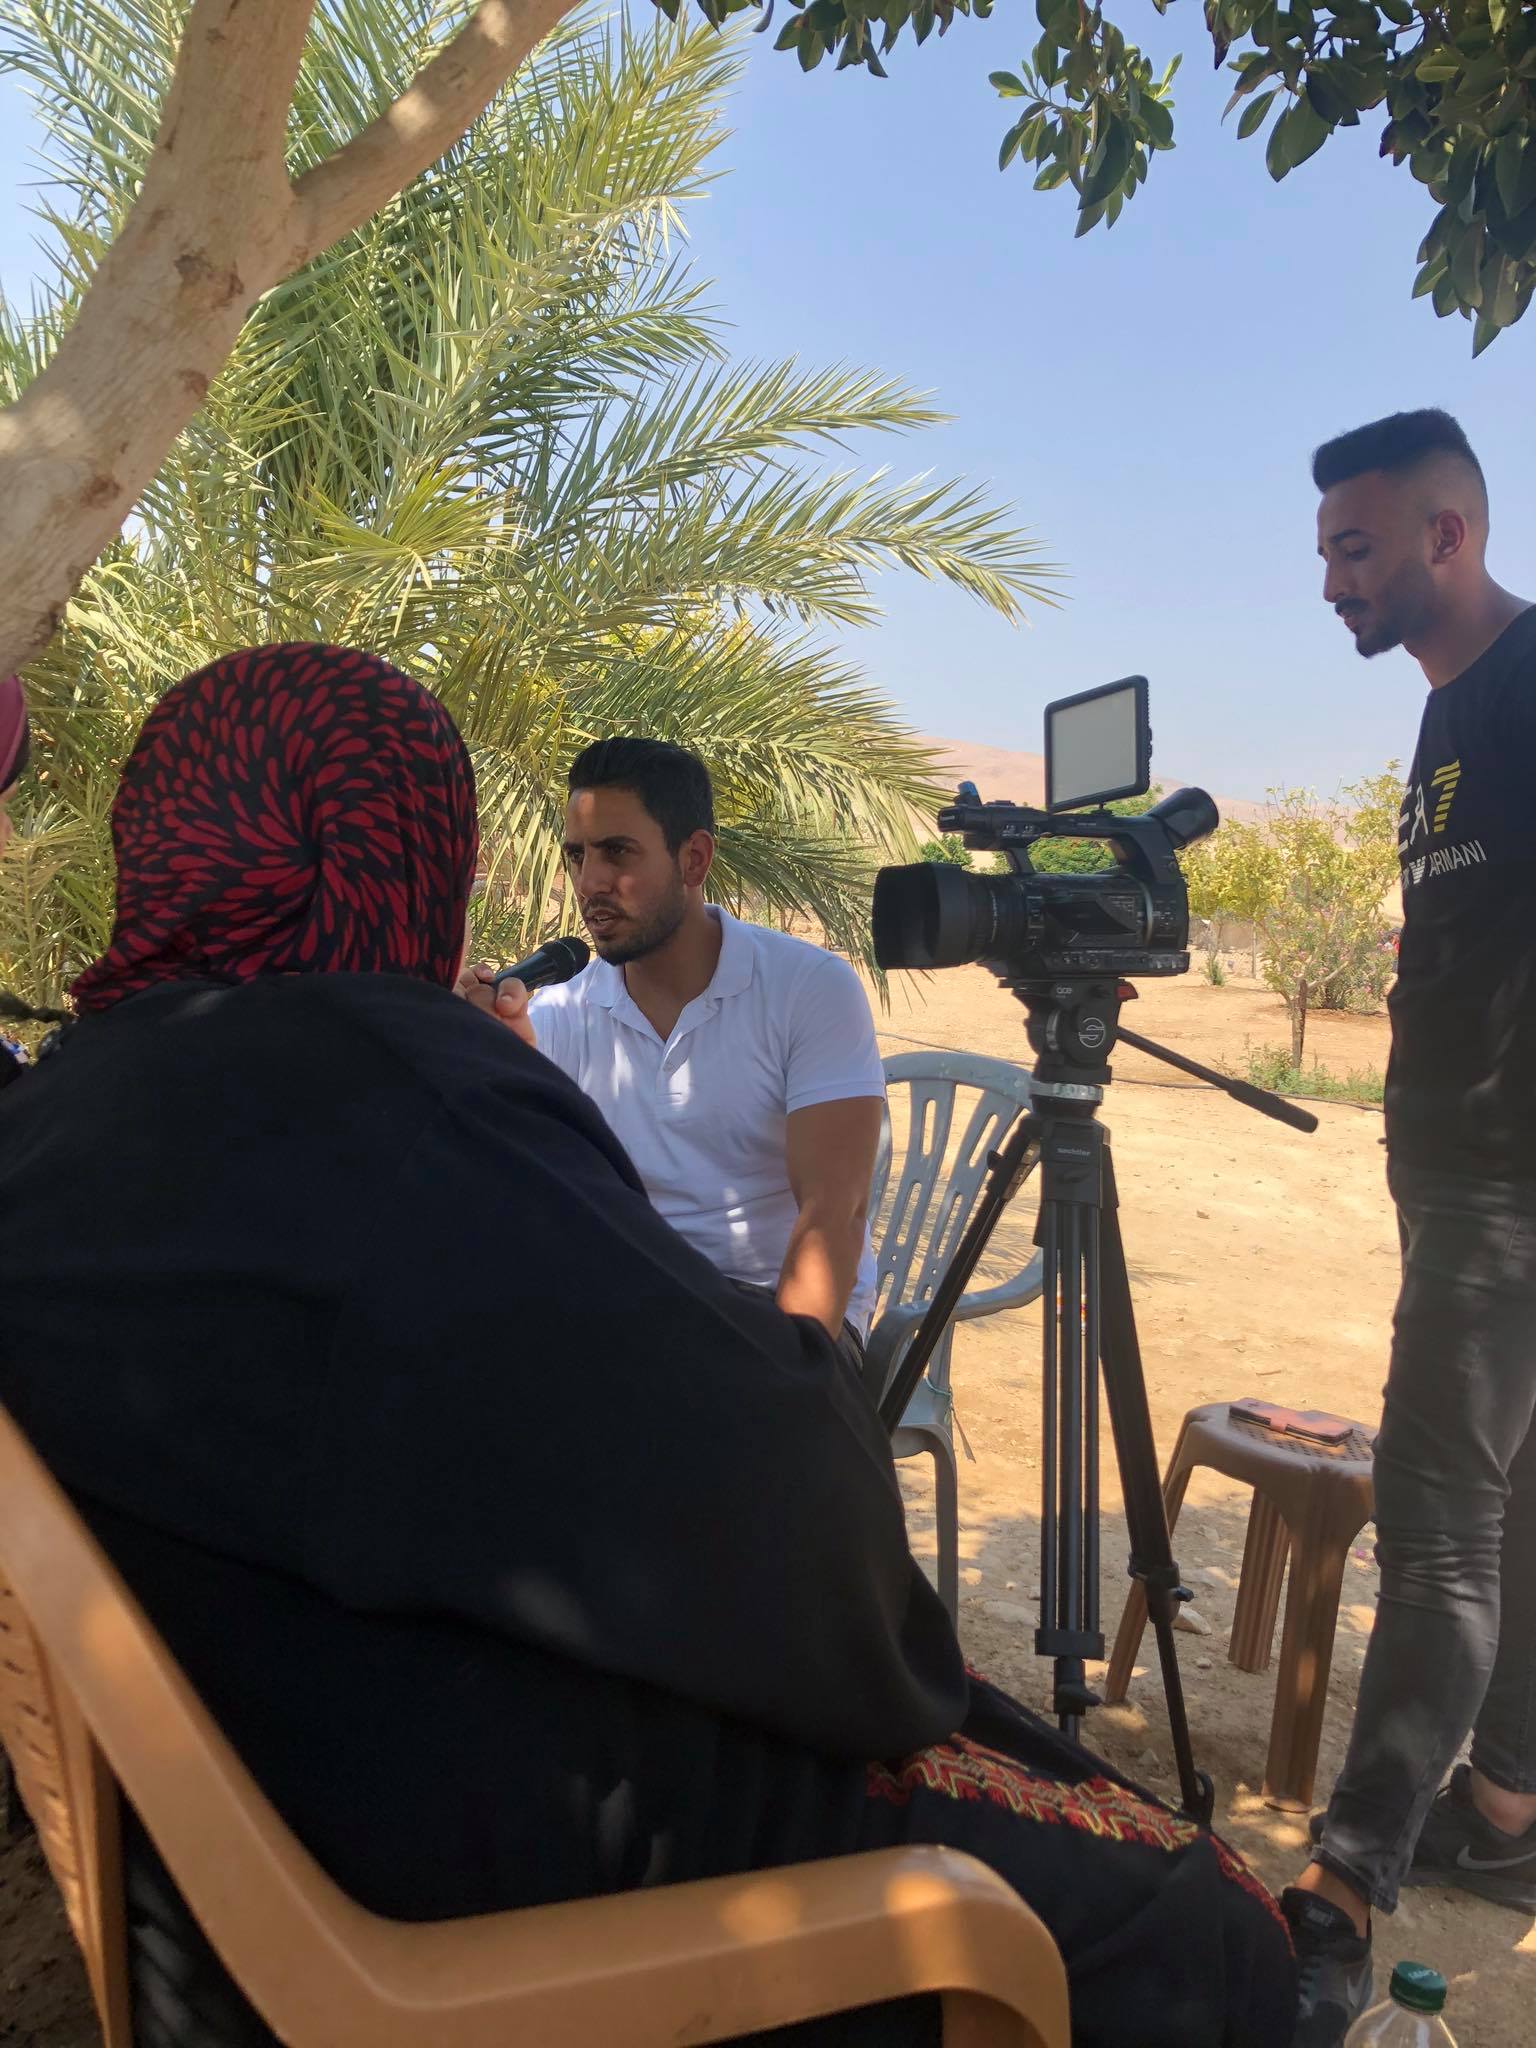  “ ADWAR” implements a radio episode where shading light on the reality of women’s needs in Al-Fasayel Bedouin Community – Jericho